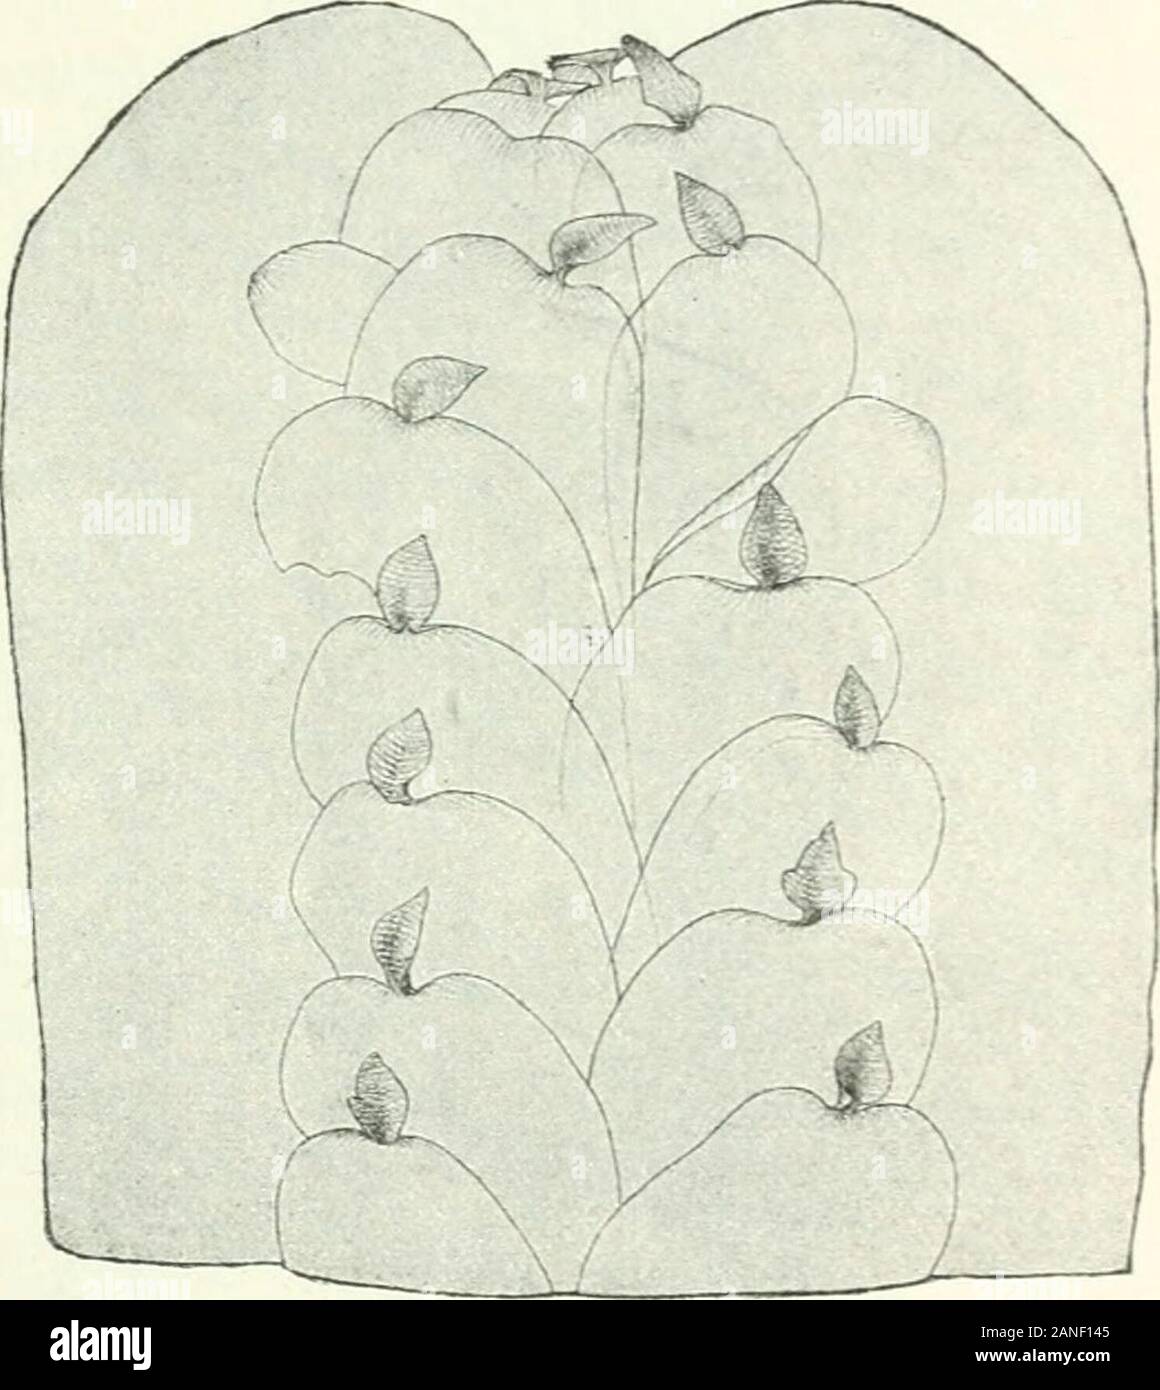 Organography of plants, especially of the archegoniatae and spermaphyta . Fig. 26. Plagiochasma Aitonia. Maleplant, with five antherldial groups, seen fromabove. The scales upon the under side bendover the vegetative point. The youngerantheridial groups are protected also byoverlapping scales which form their perichae-tiutn. Magnified 8.. Fig. 27. Marchantia chenopoda. An Andine species. Apexof the thallus seen from below-. There are two rows of scales.Towards the upper left side of the figure an additional one isvisible. Each scale has an apical appendage which originallyarched o er the vege Stock Photo